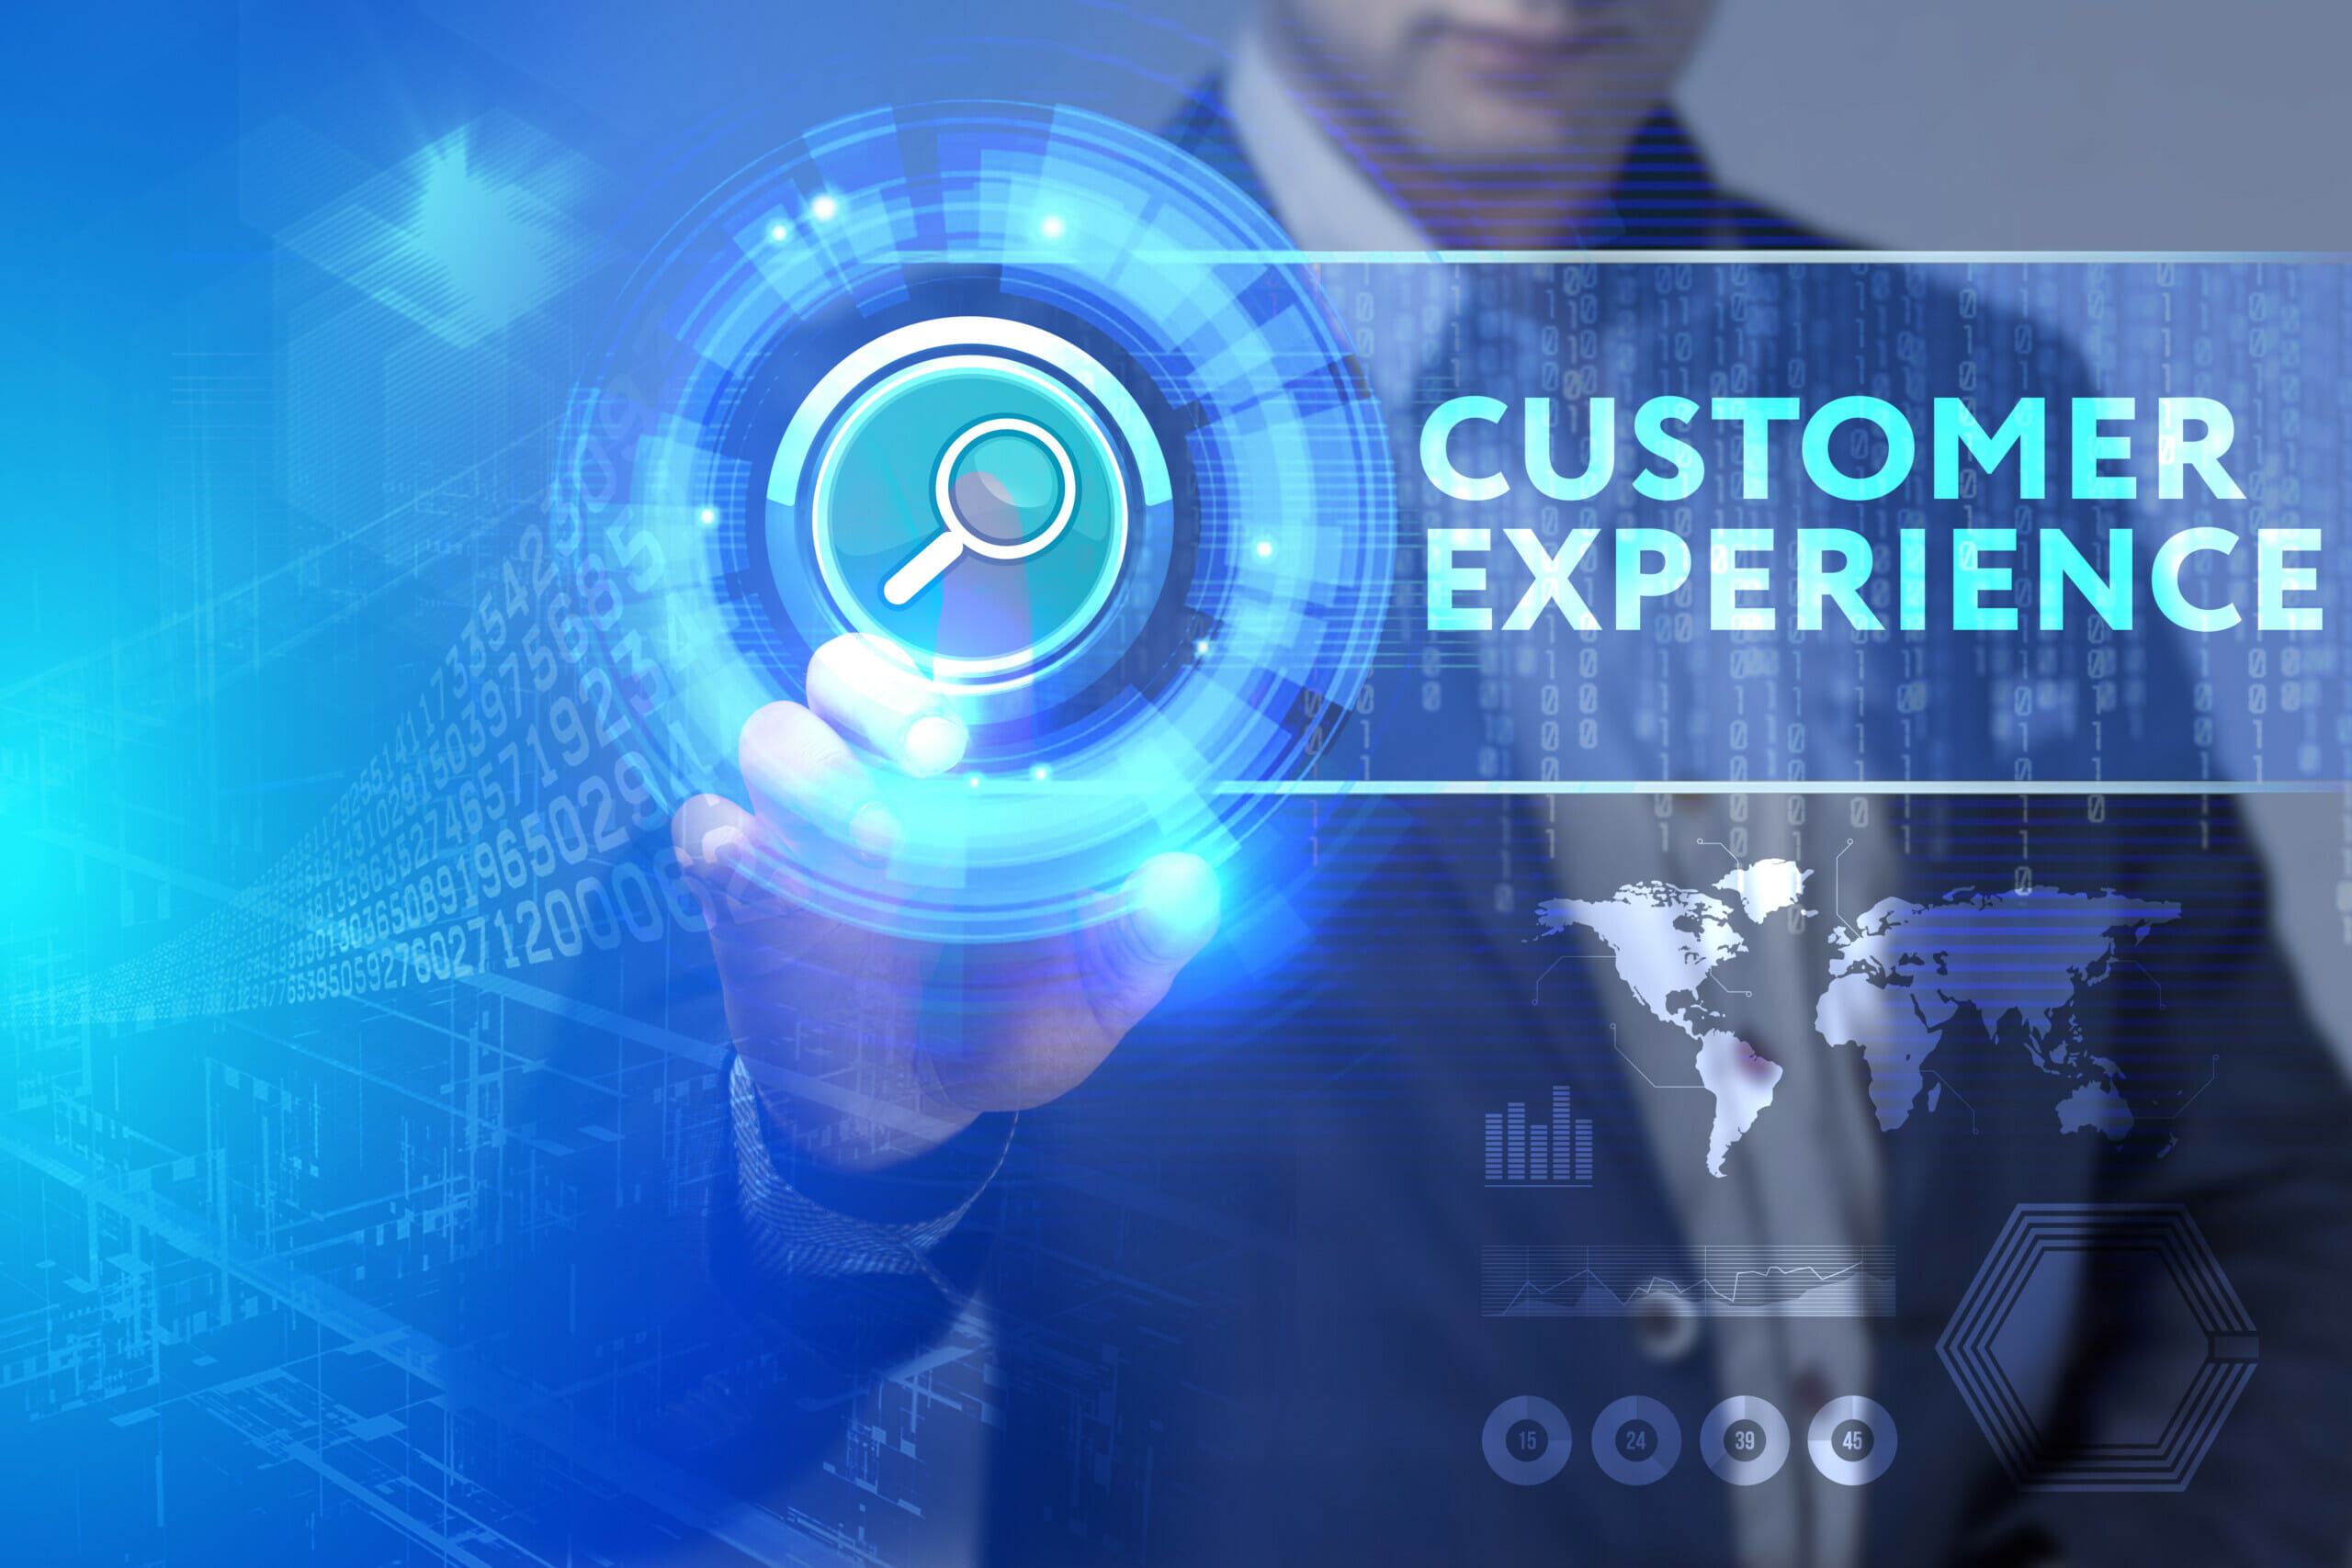 Customer experiences require a seamless workflow